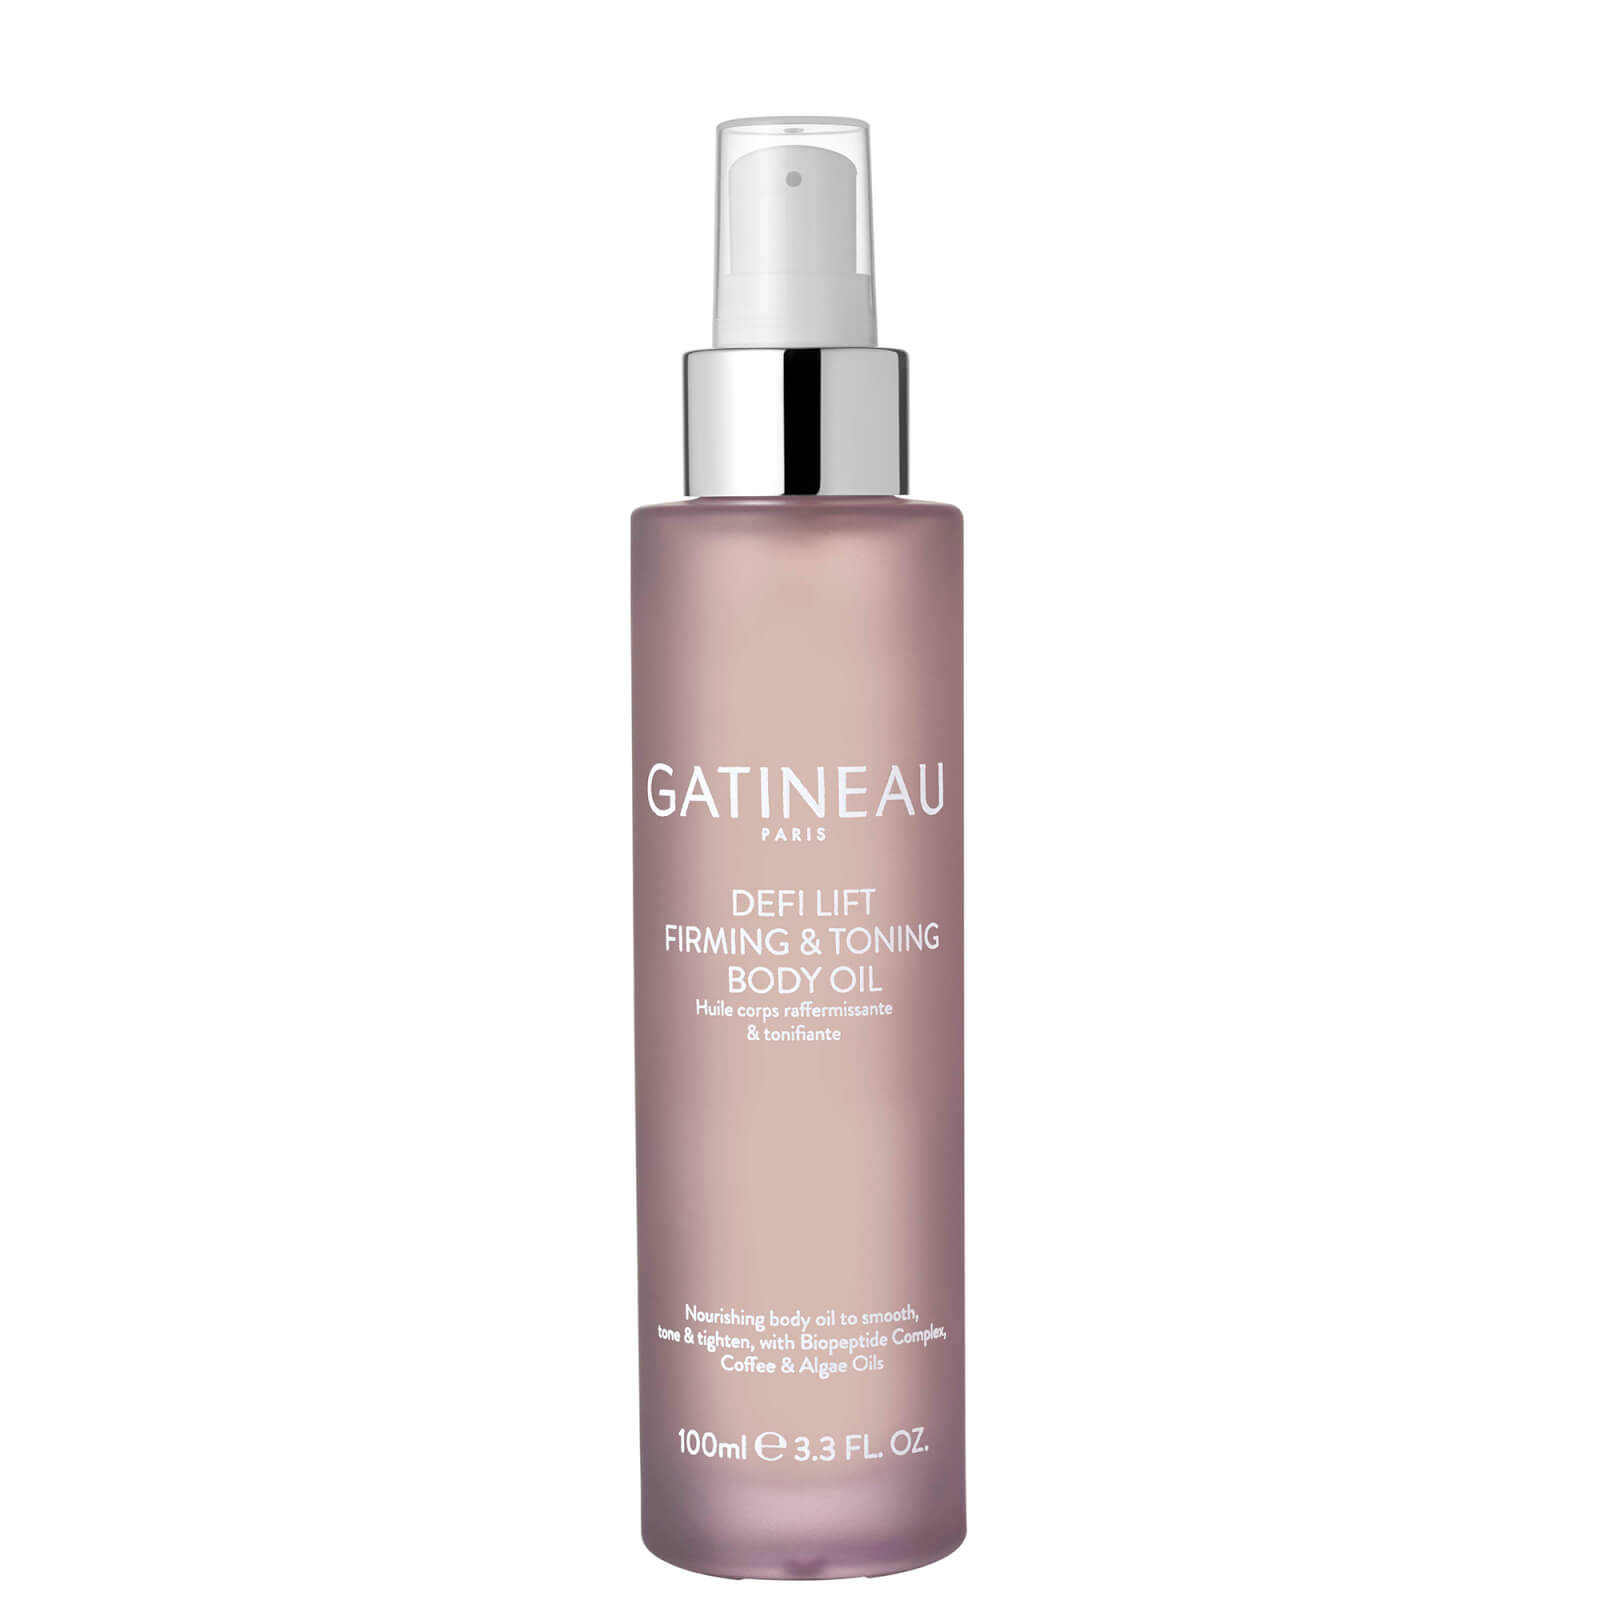 Gatineau Defilift Firming And Toning Body Oil 100ml